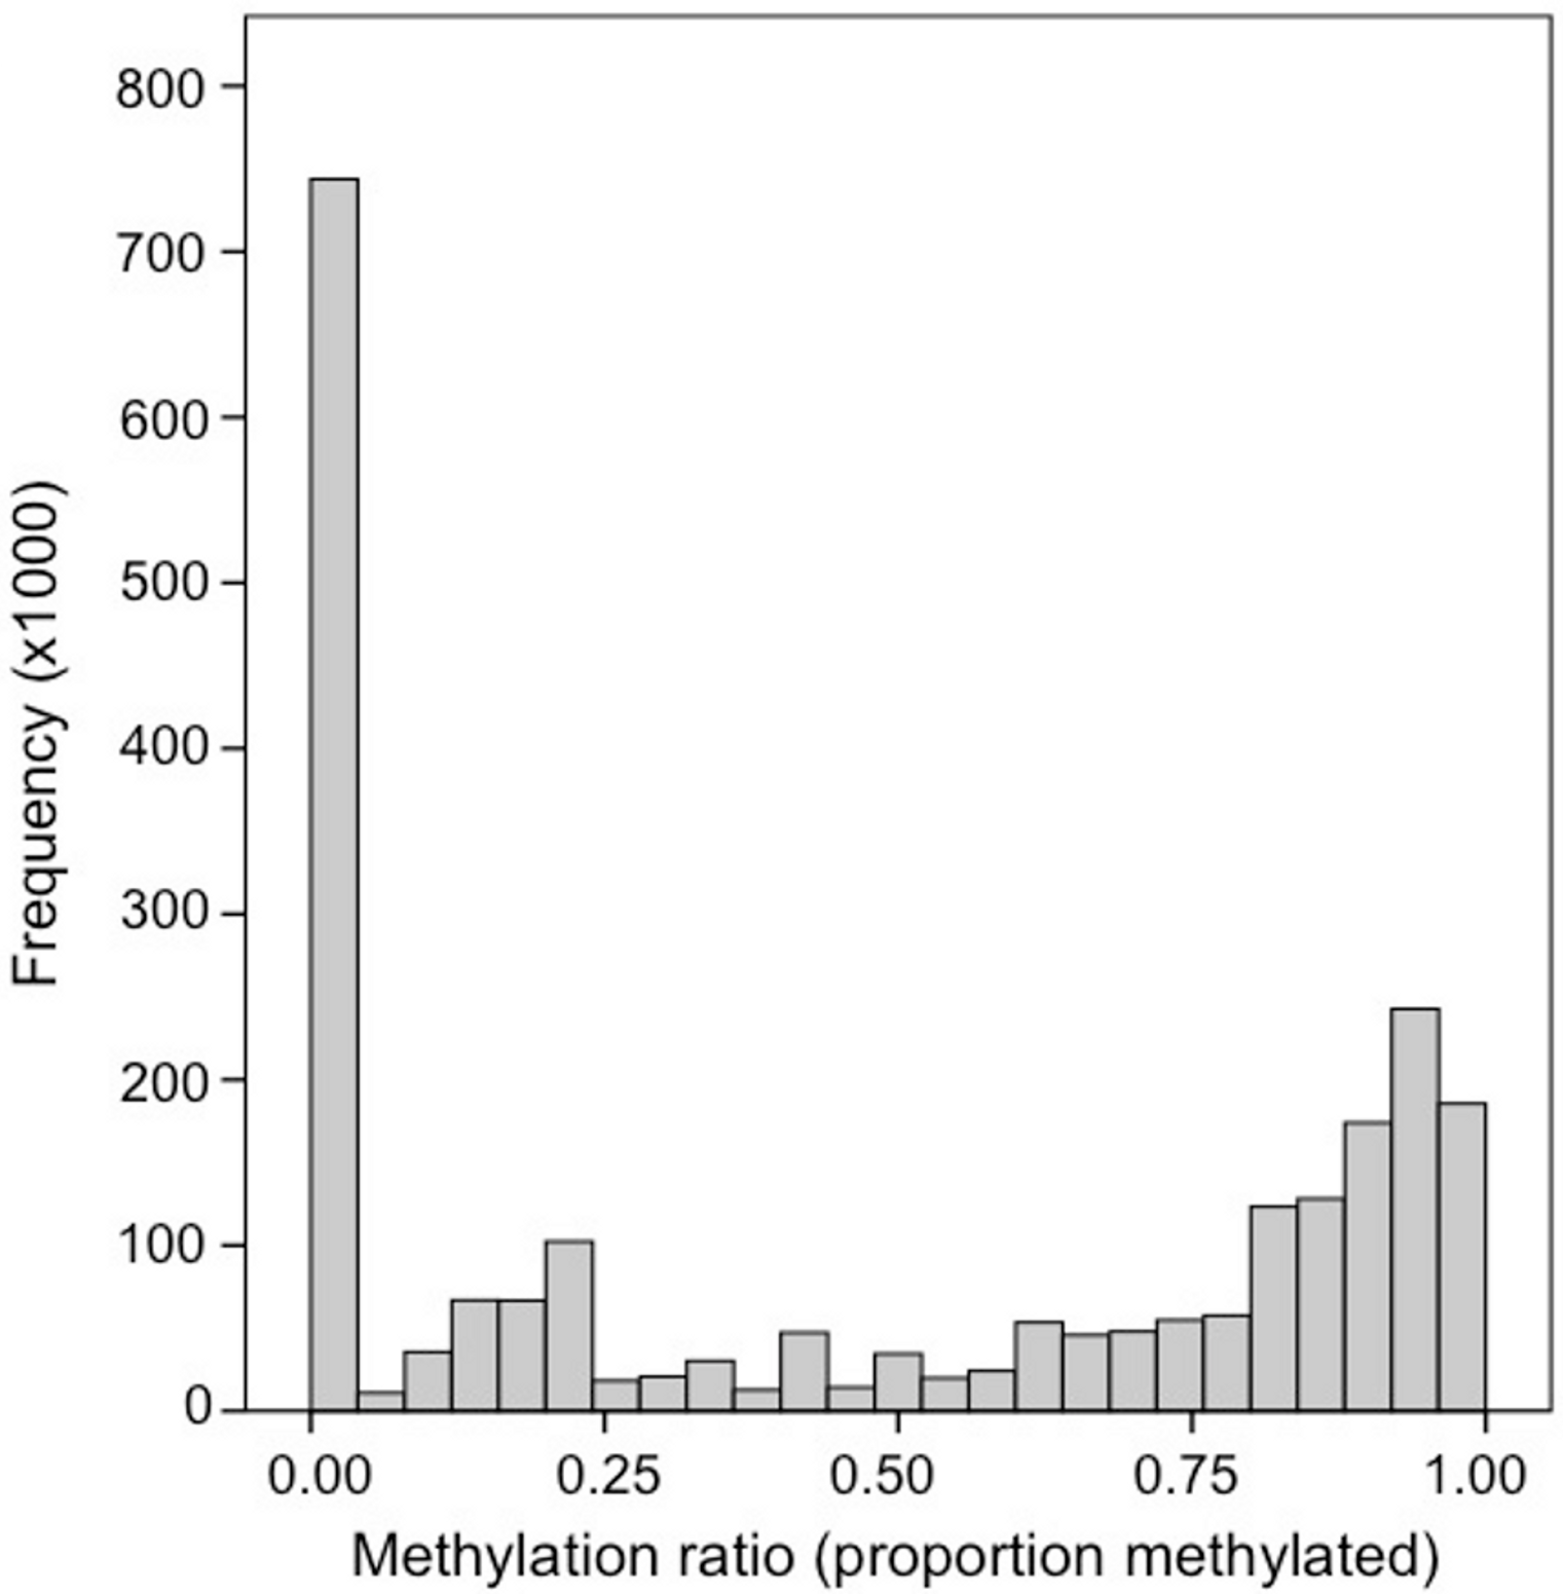 Frequency distribution of methylation ratios for CpG dinucleotides in oyster gill tissue. [@10.7717/peerj.215](#refs)